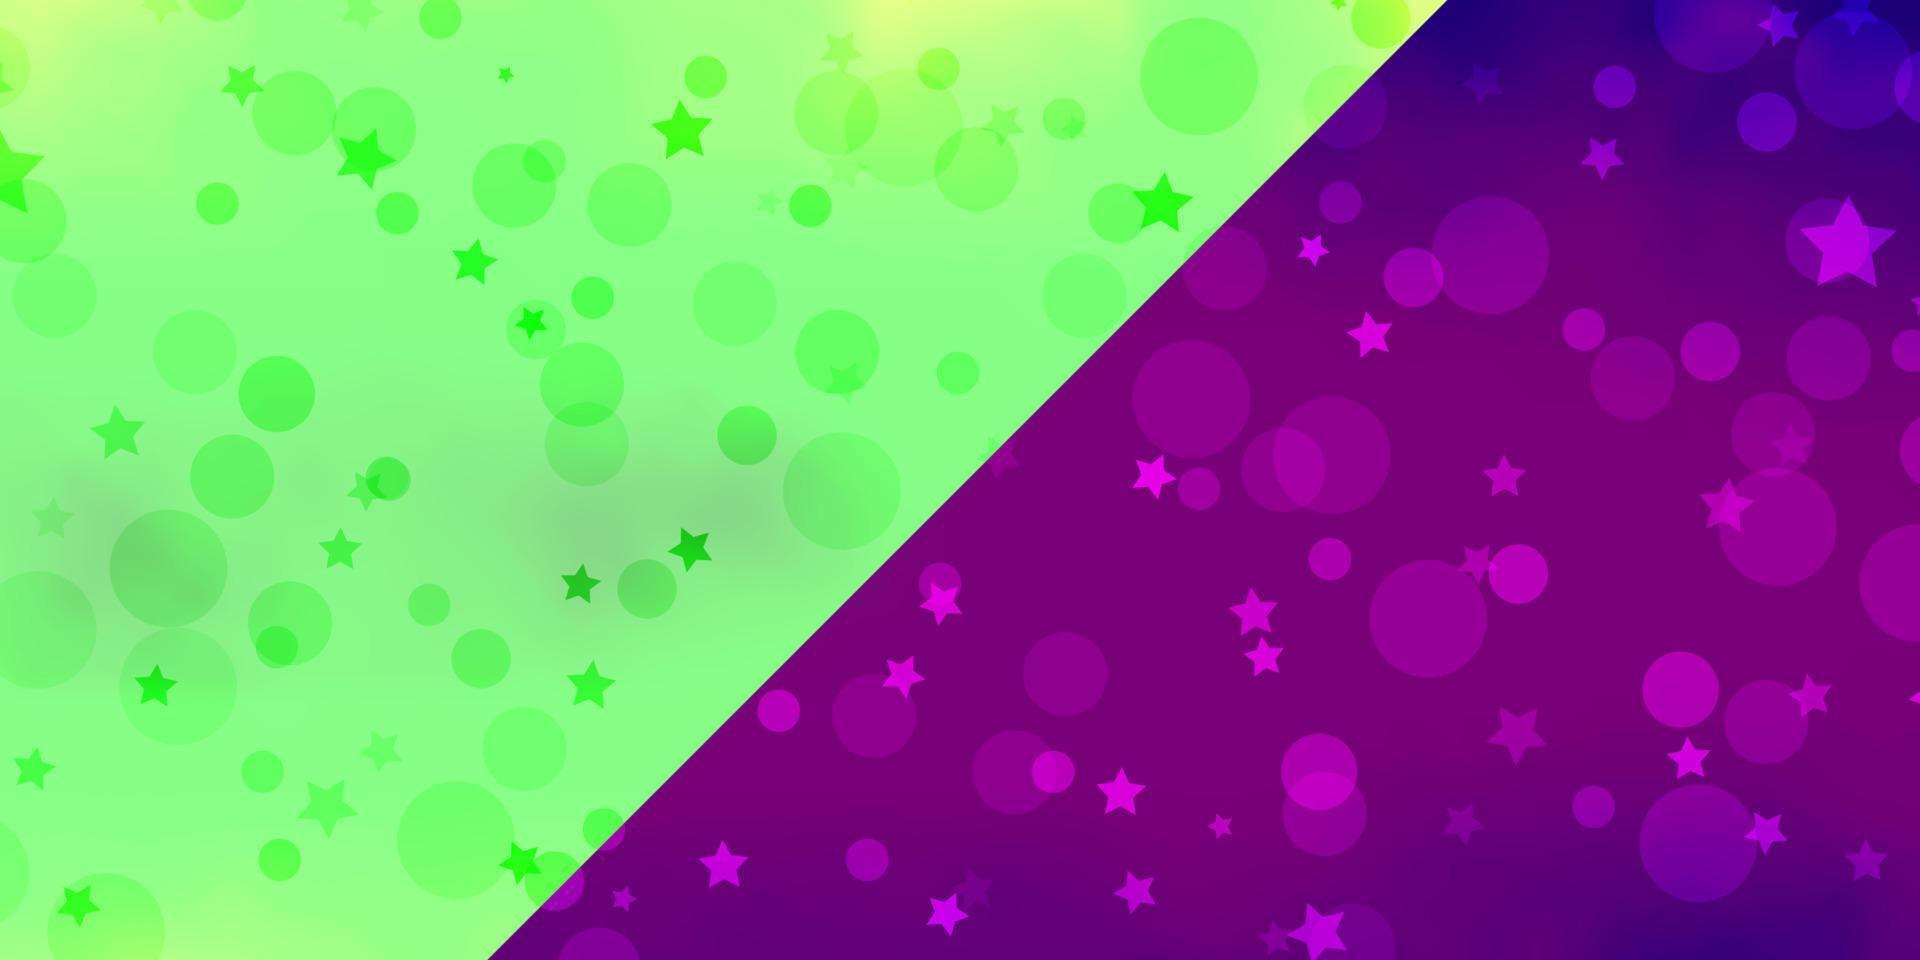 Vector template with circles, stars.